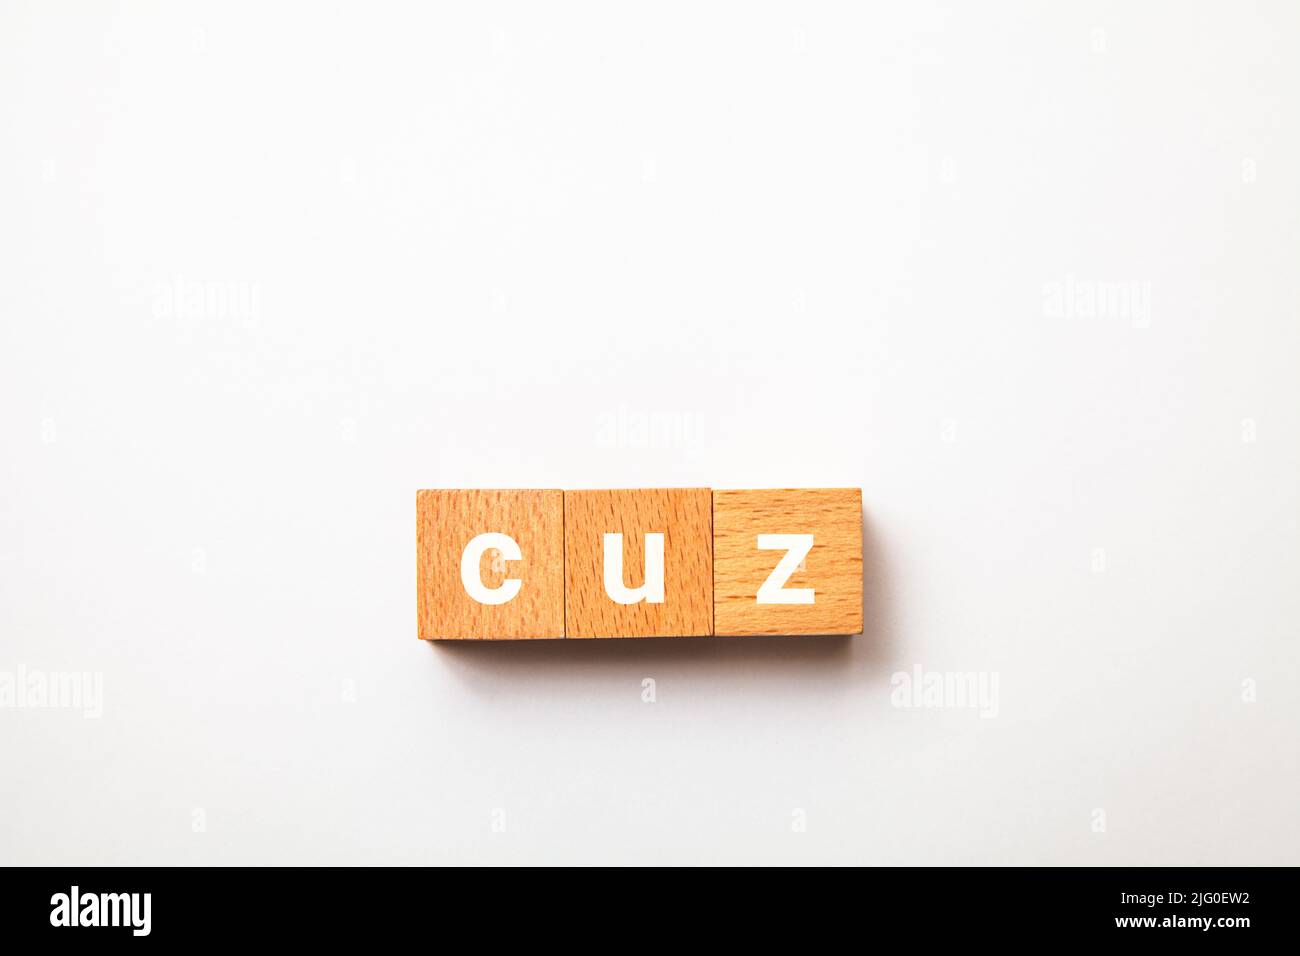 cuz character. because. cause. Written on three wooden blocks. White letters. White background. Stock Photo